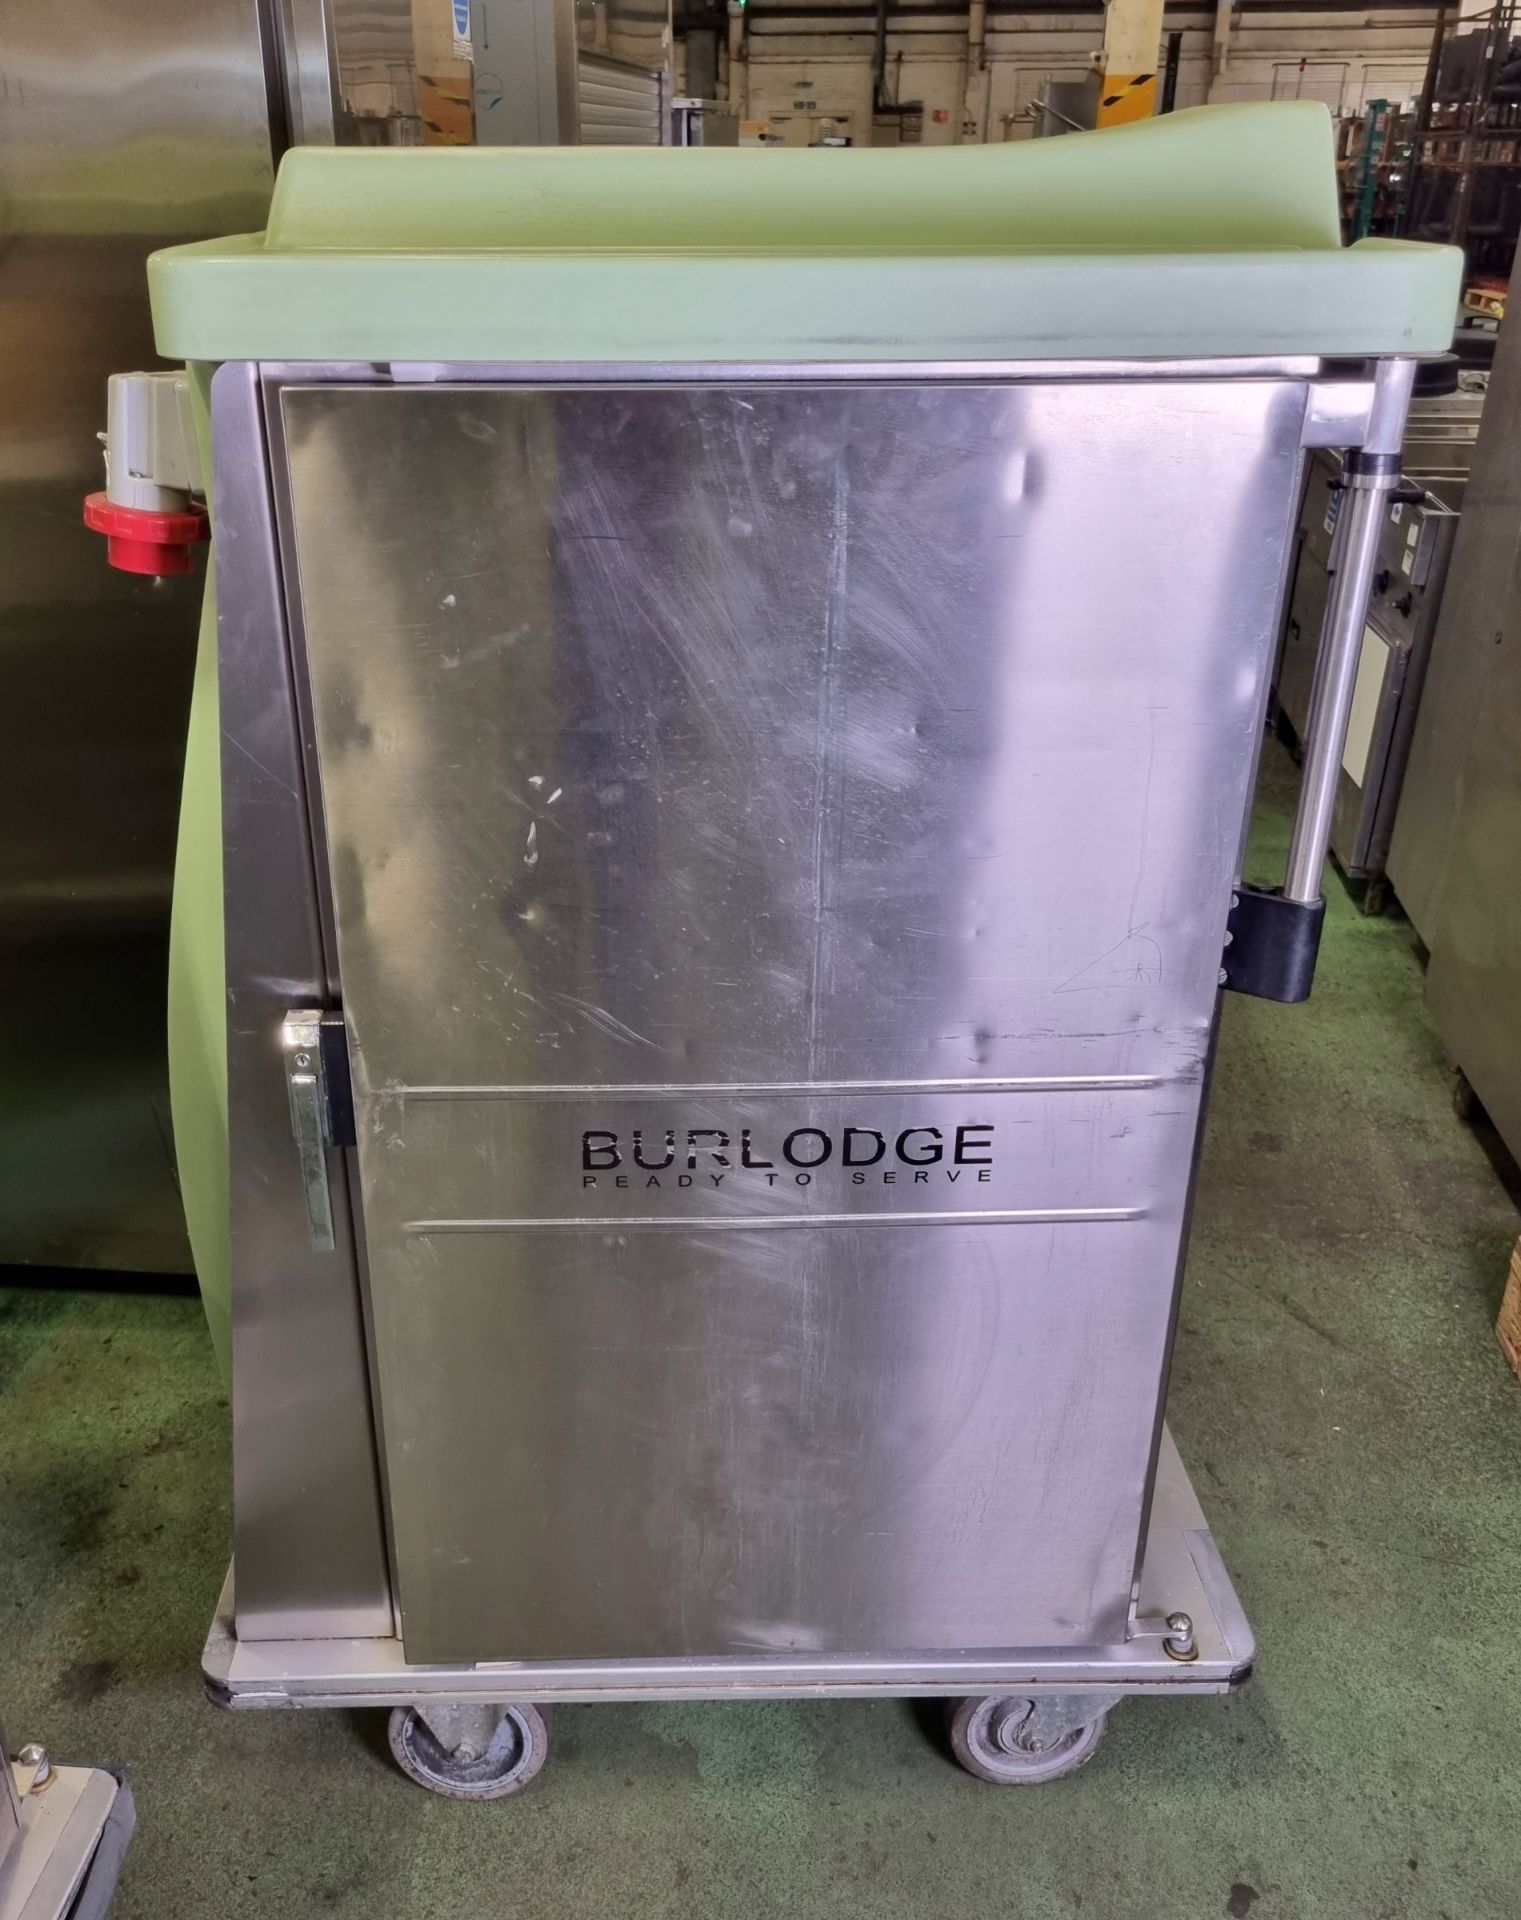 Burlodge RTS hot and cold tray delivery trolley - opens boths sides - W 800 x D 1100 x H 1500mm - Image 4 of 5